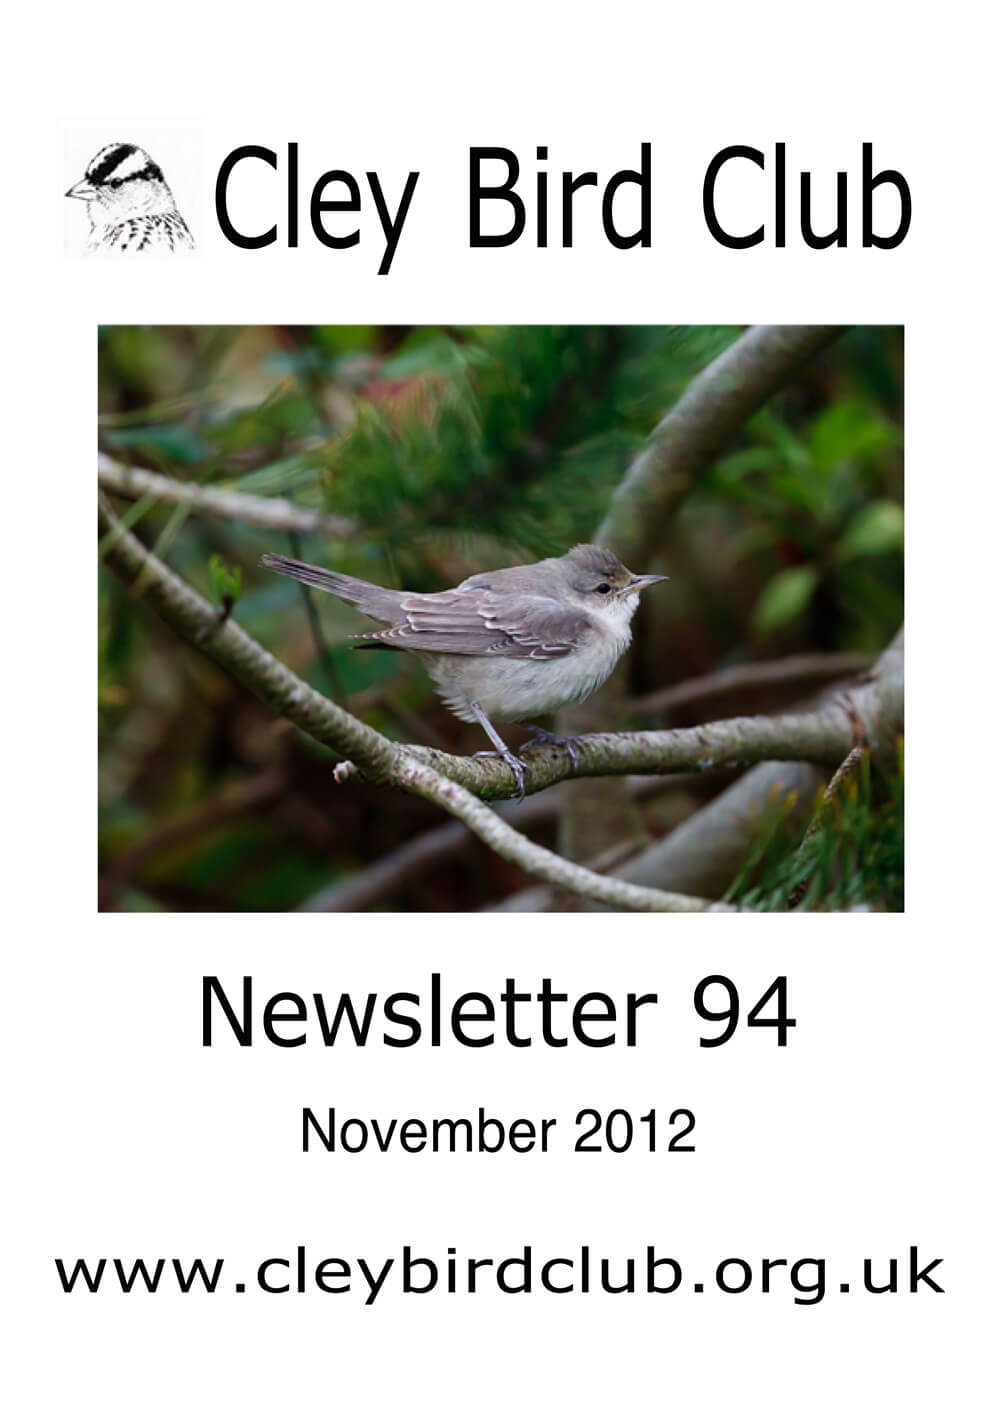 cbc-newsletter-94-front-cover